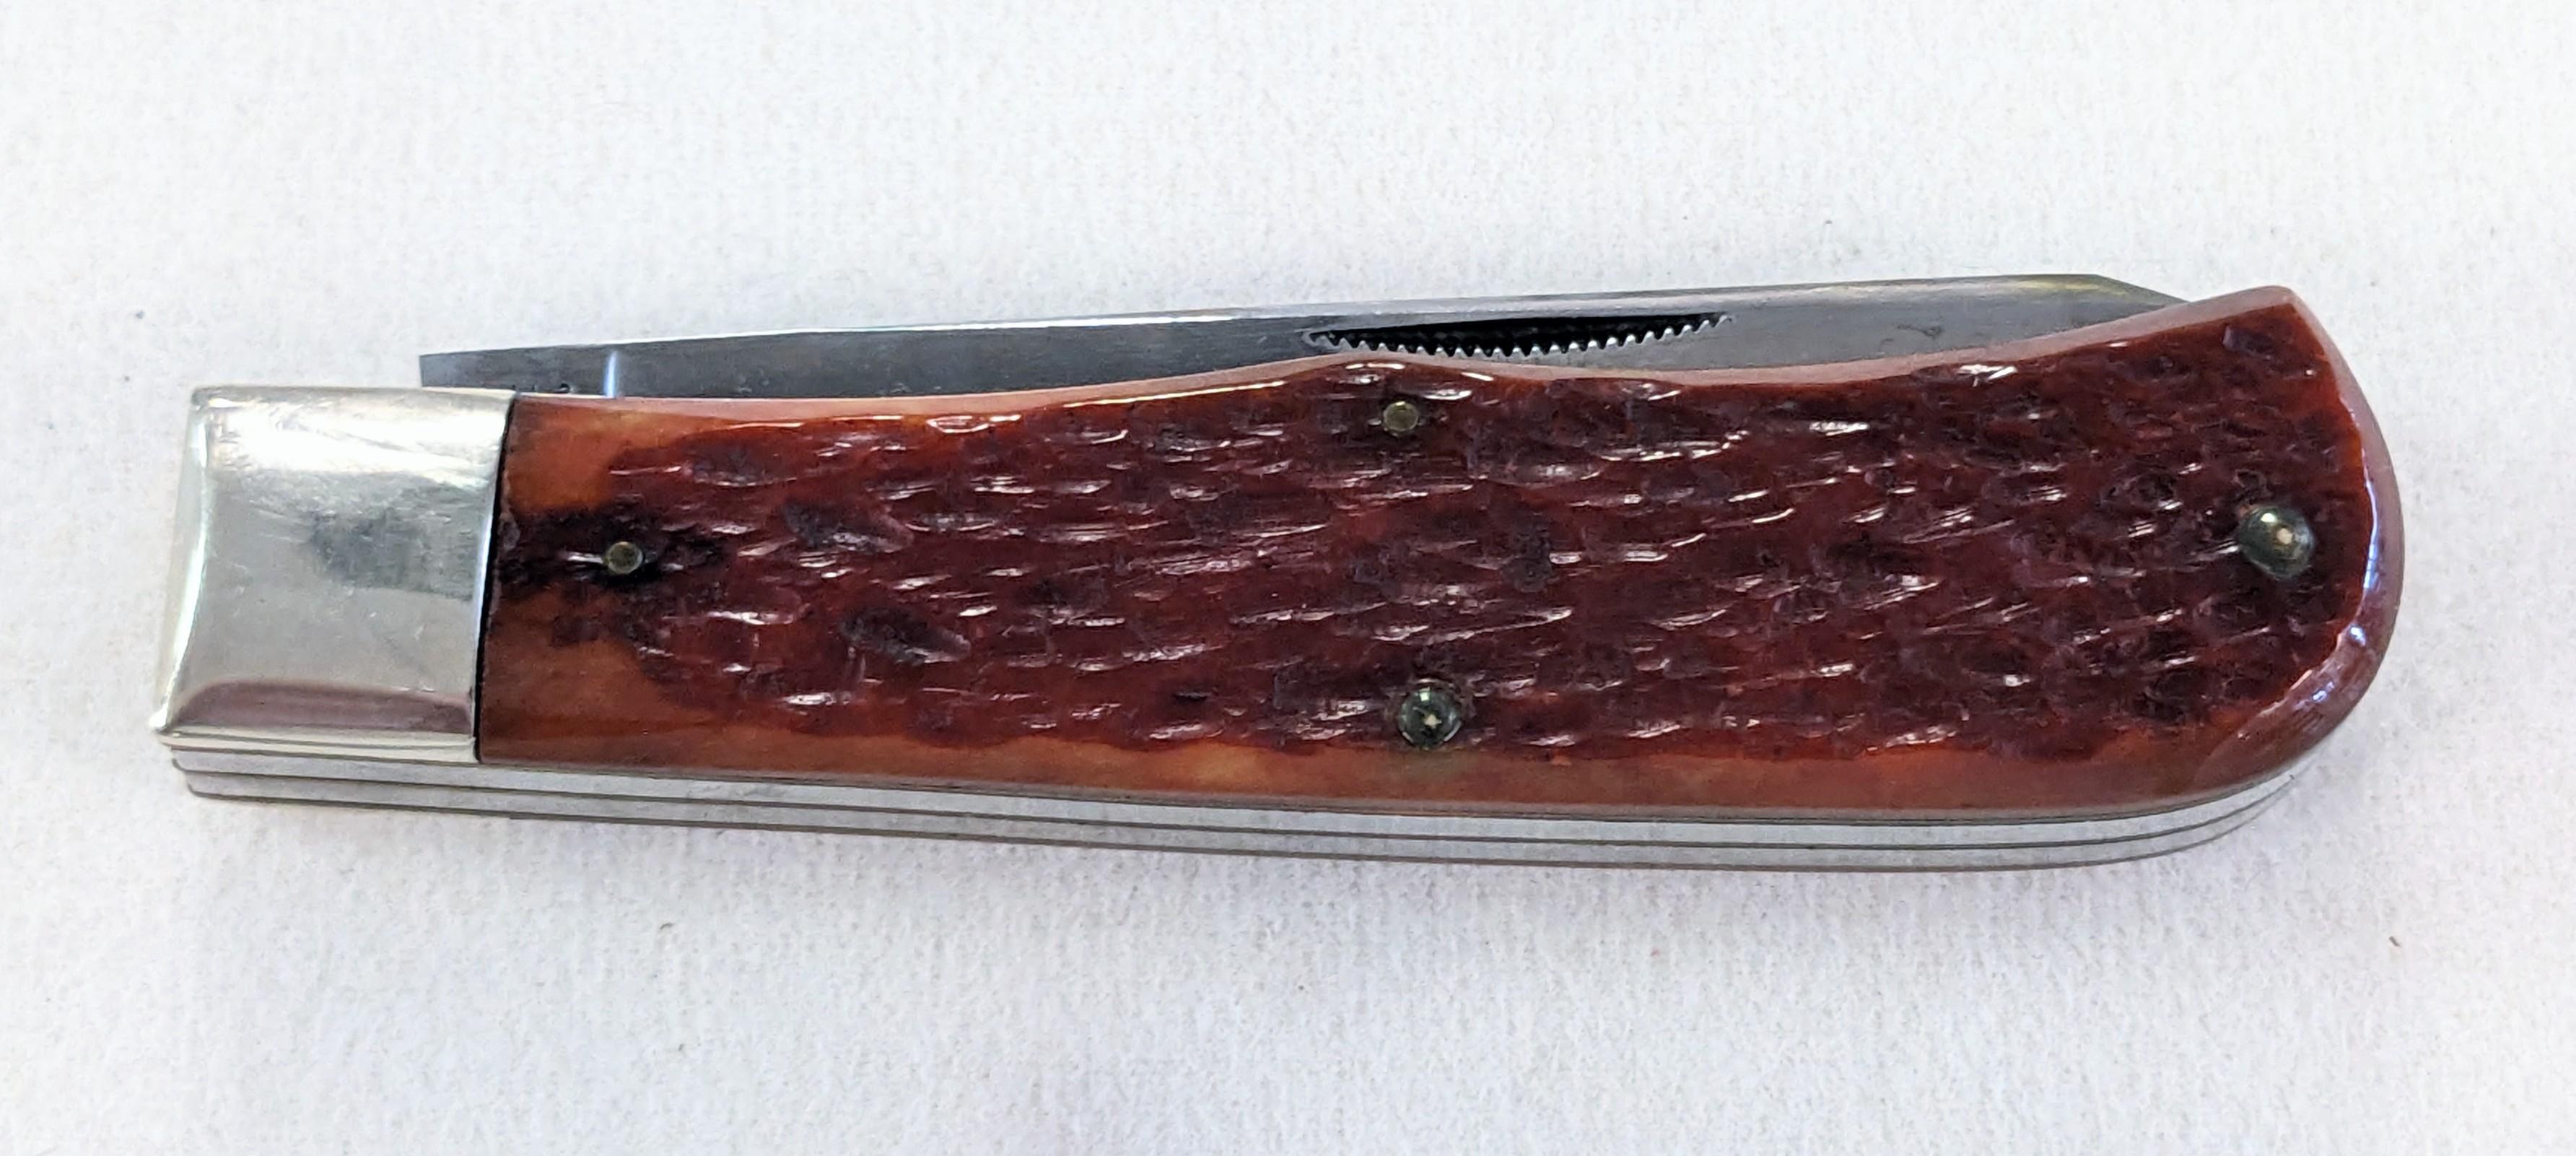 WINCHESTER W18 29103 CARTRIDGE SERIES 3 BLADE KNIFE W/BOX PAPERS